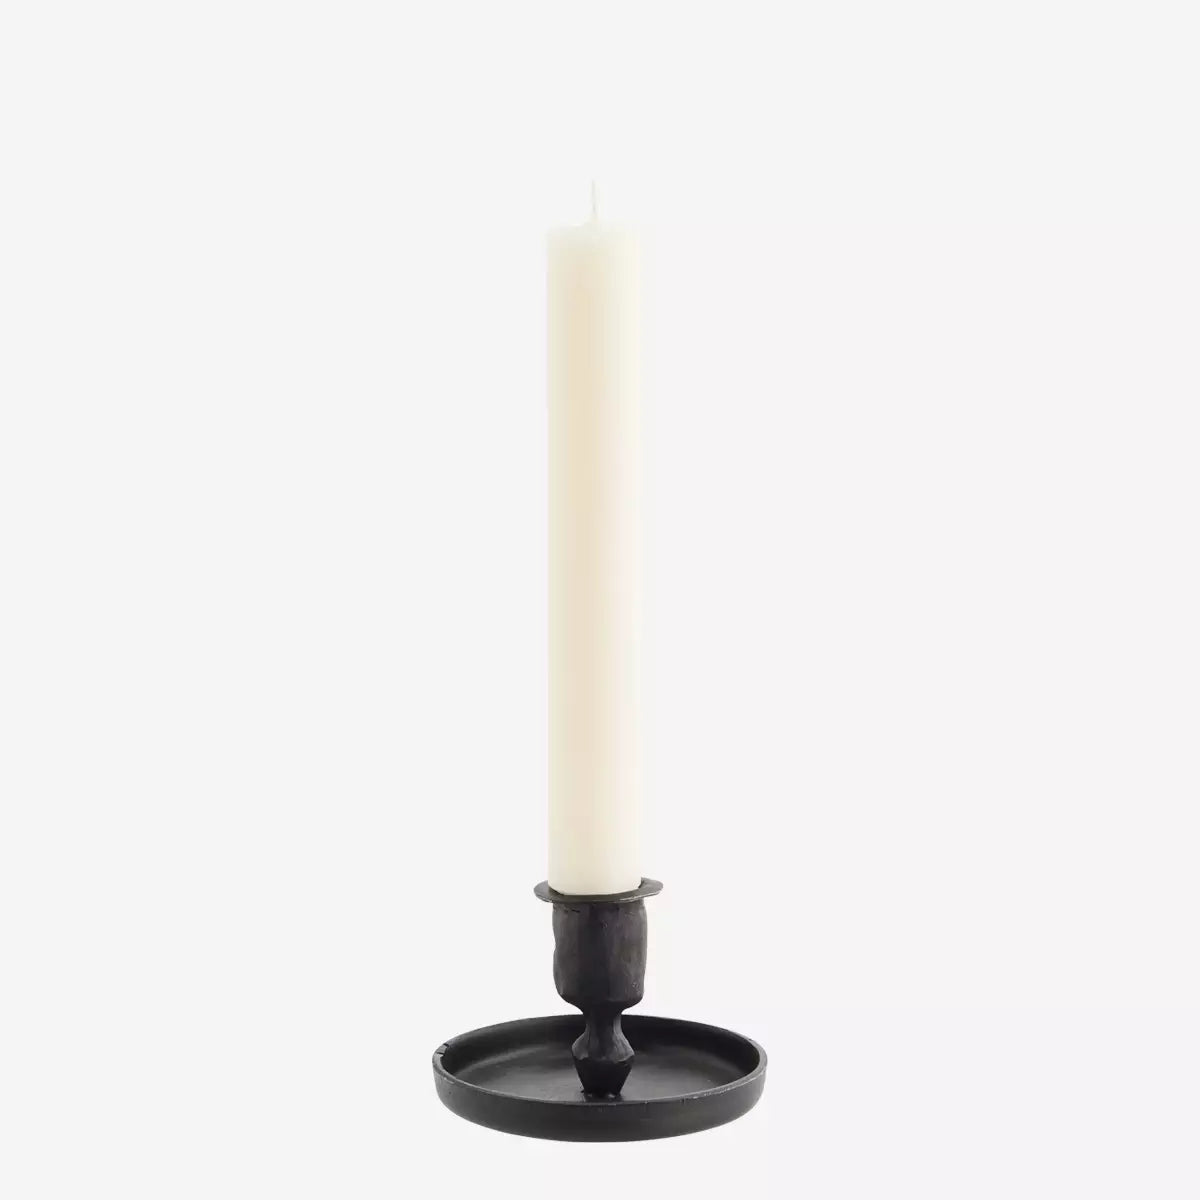 Hand Forged Iron Candle Holder - Black